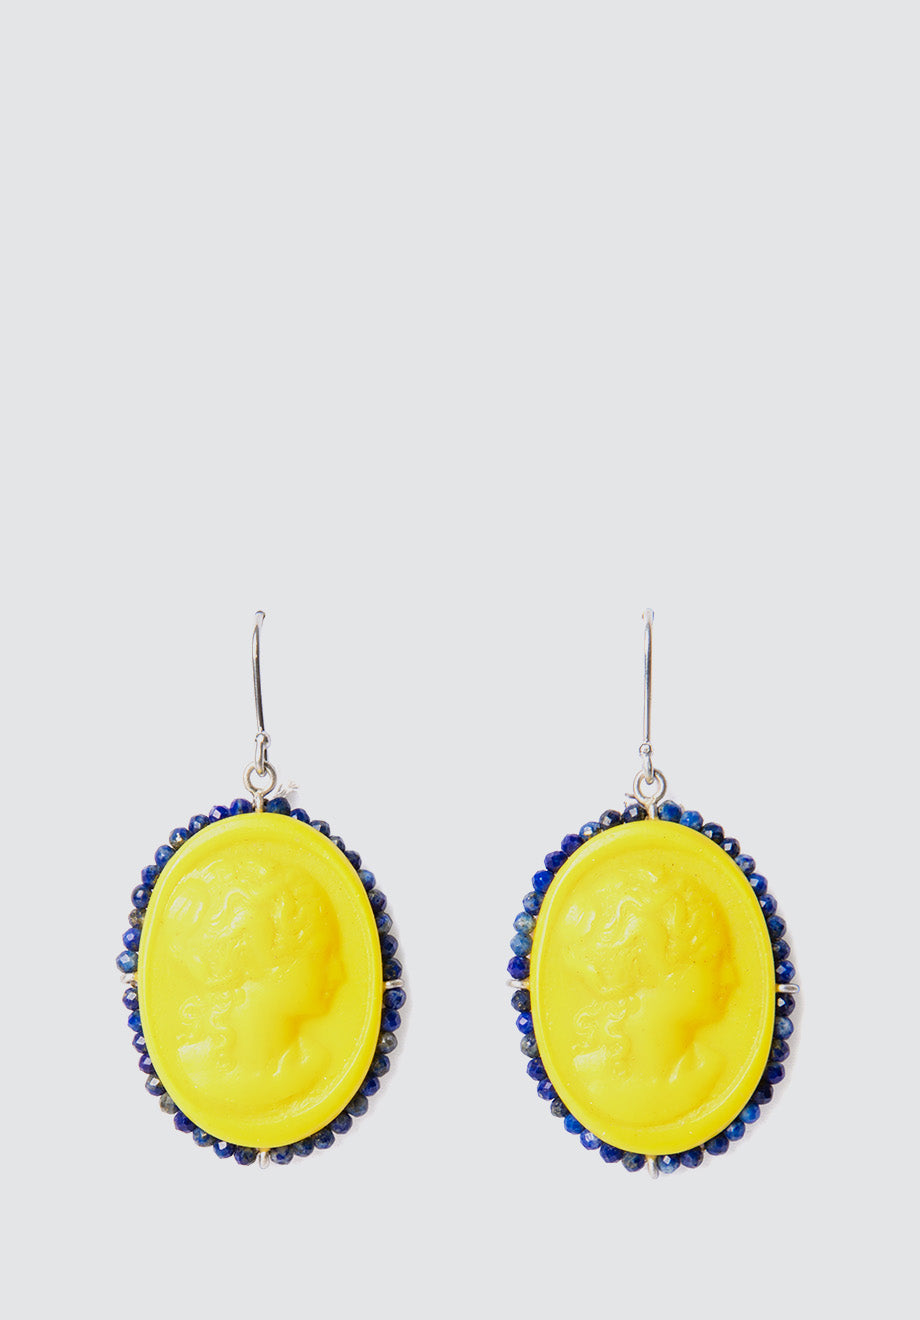 Contemporary Modern Bright Yellow Cameo Earrings